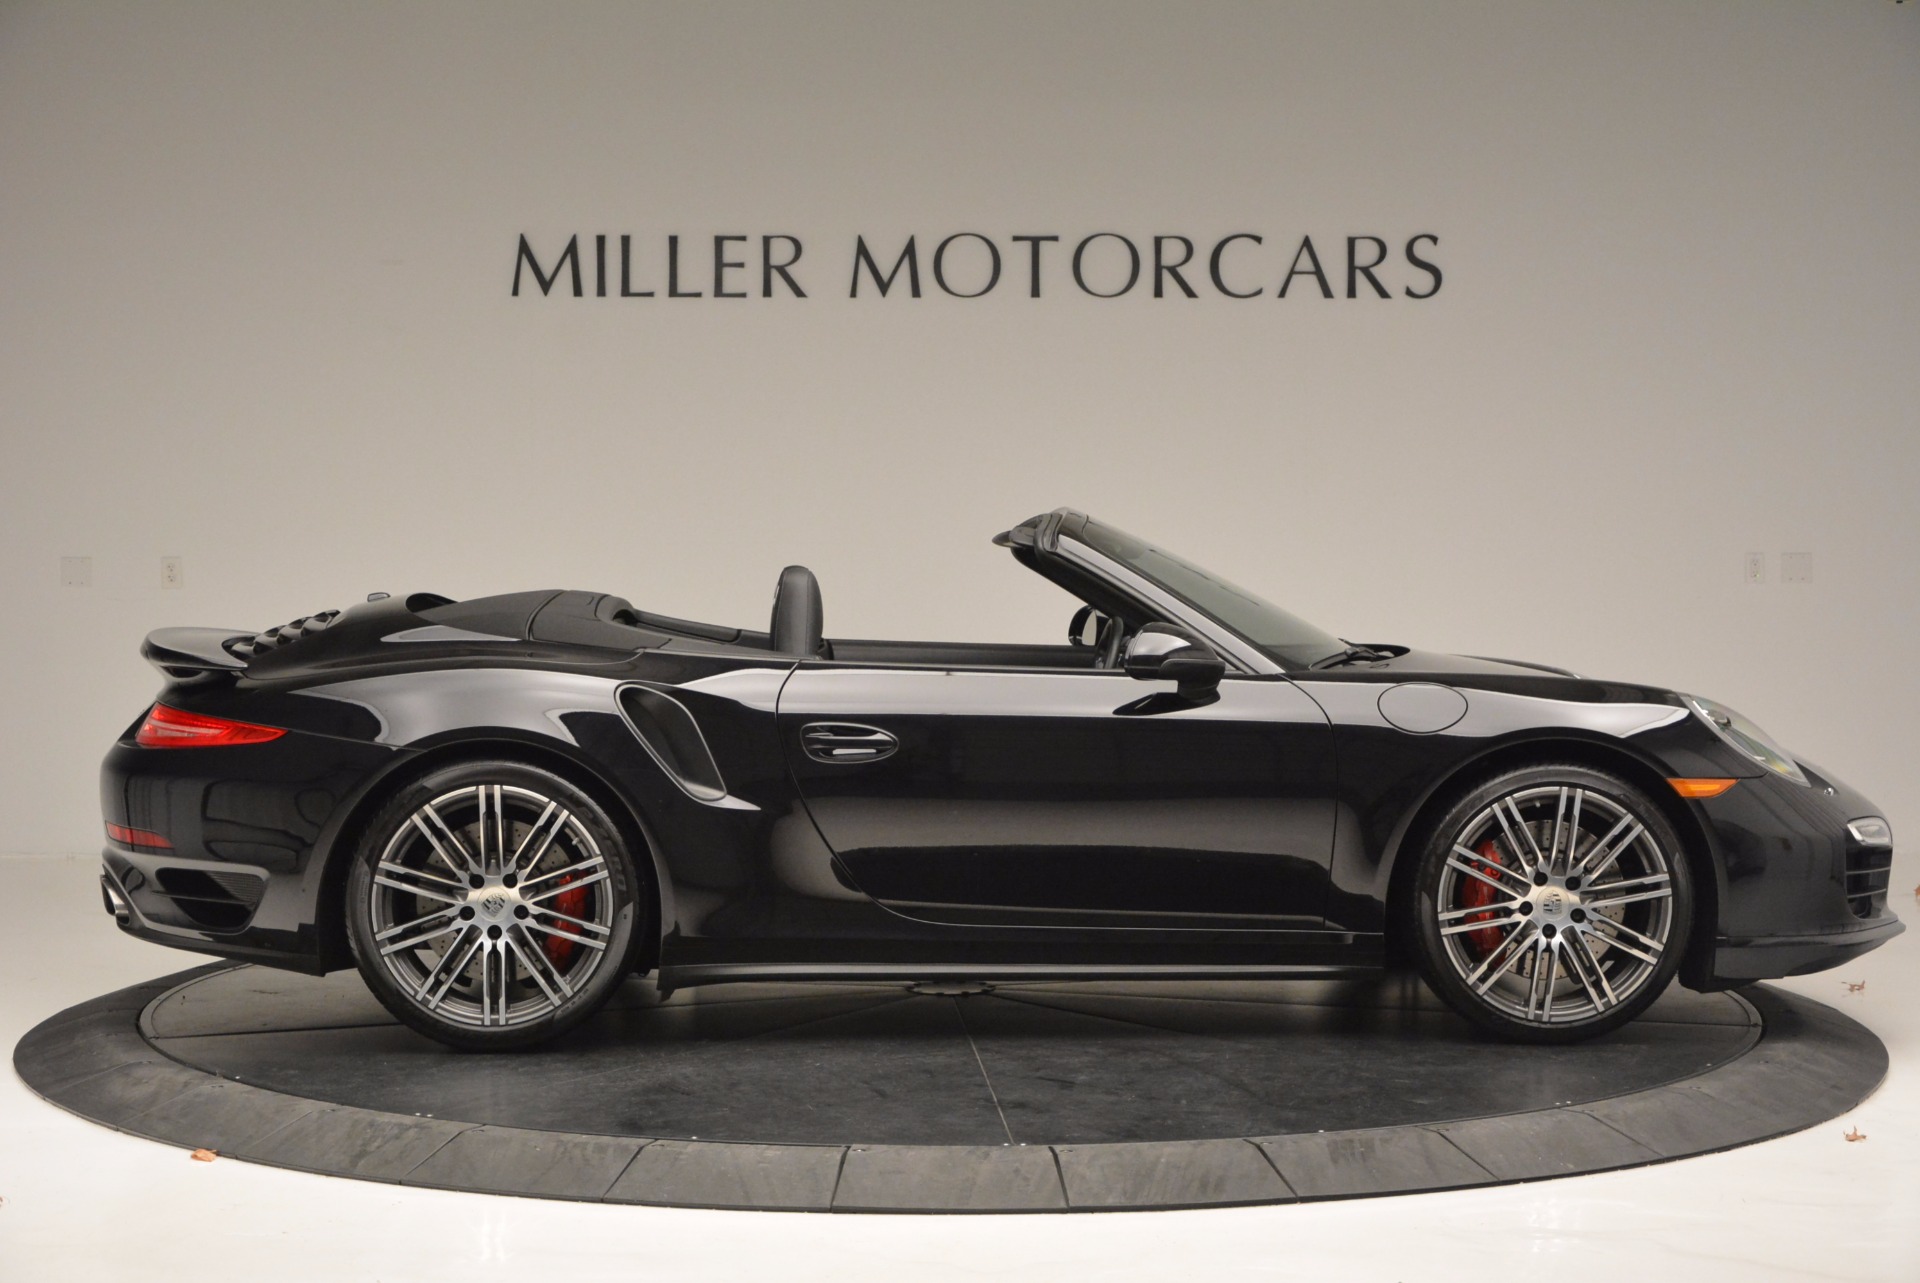 Pre Owned 2015 Porsche 911 Turbo For Sale Miller